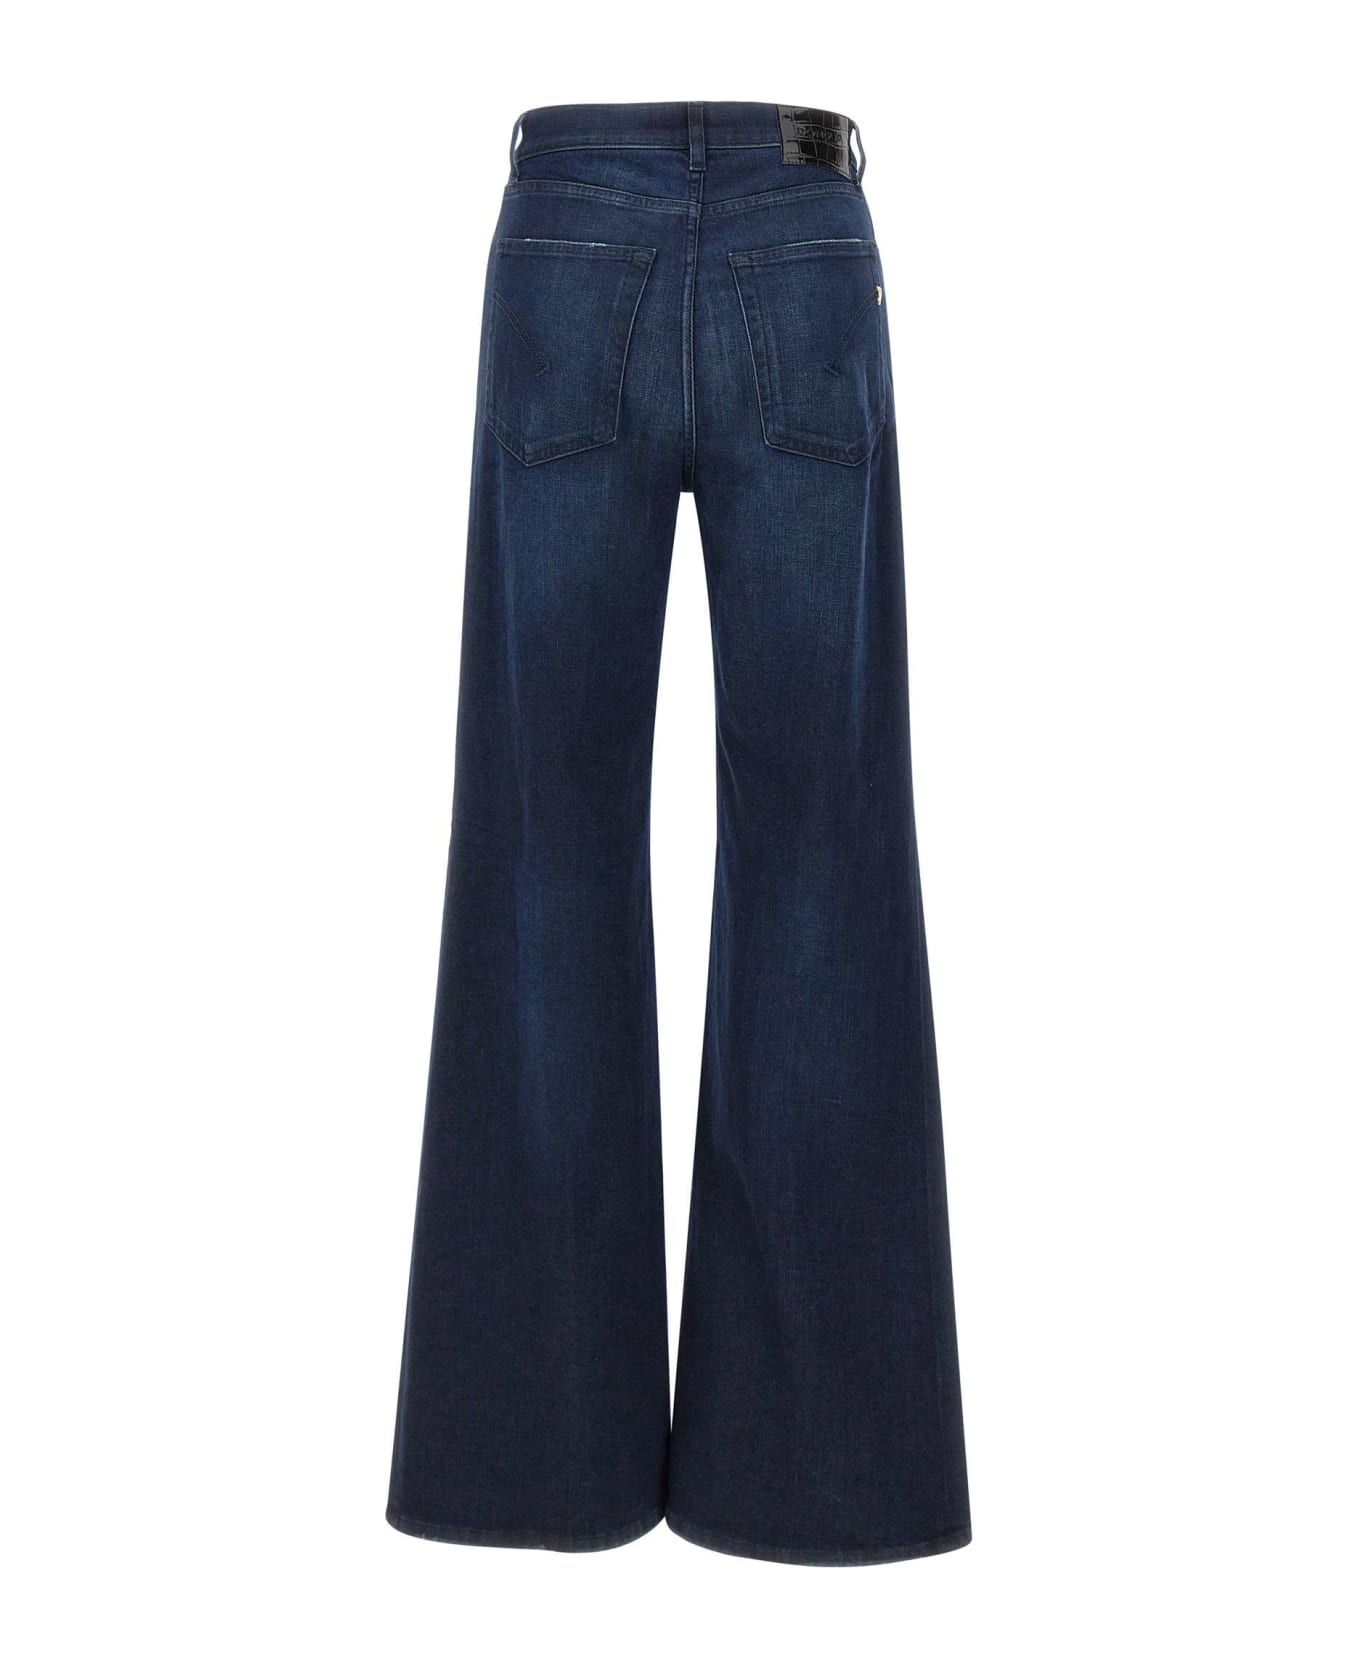 Dondup 'amber' Jeans - BLUE